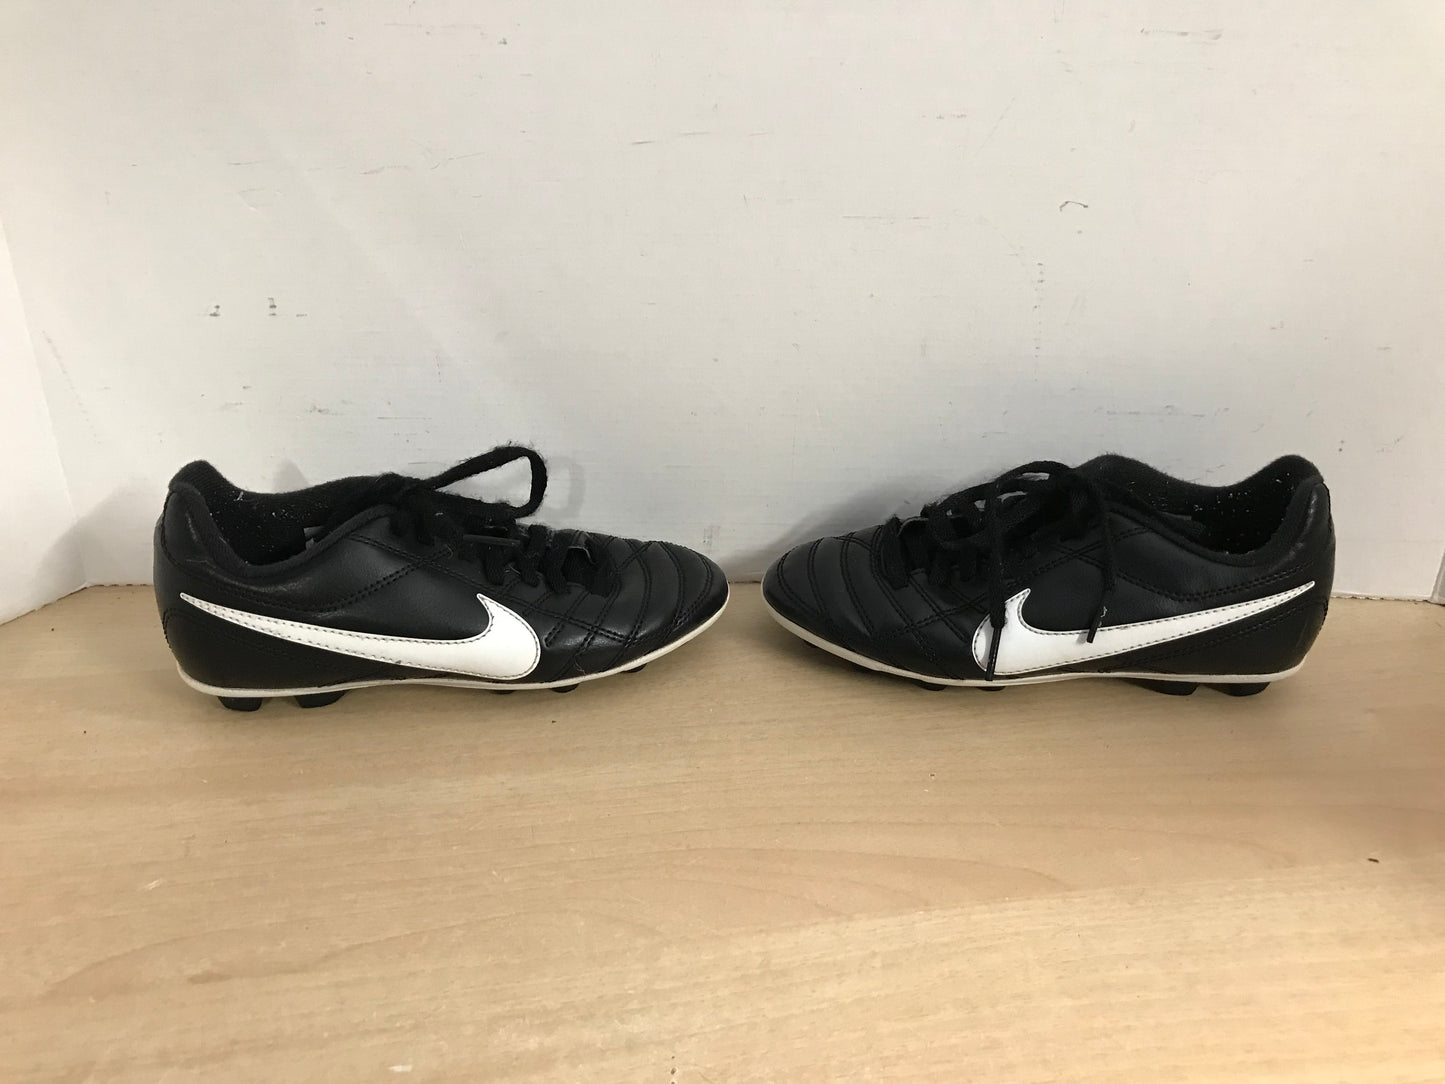 Soccer Shoes Cleats Child Size 1 Nike Black White